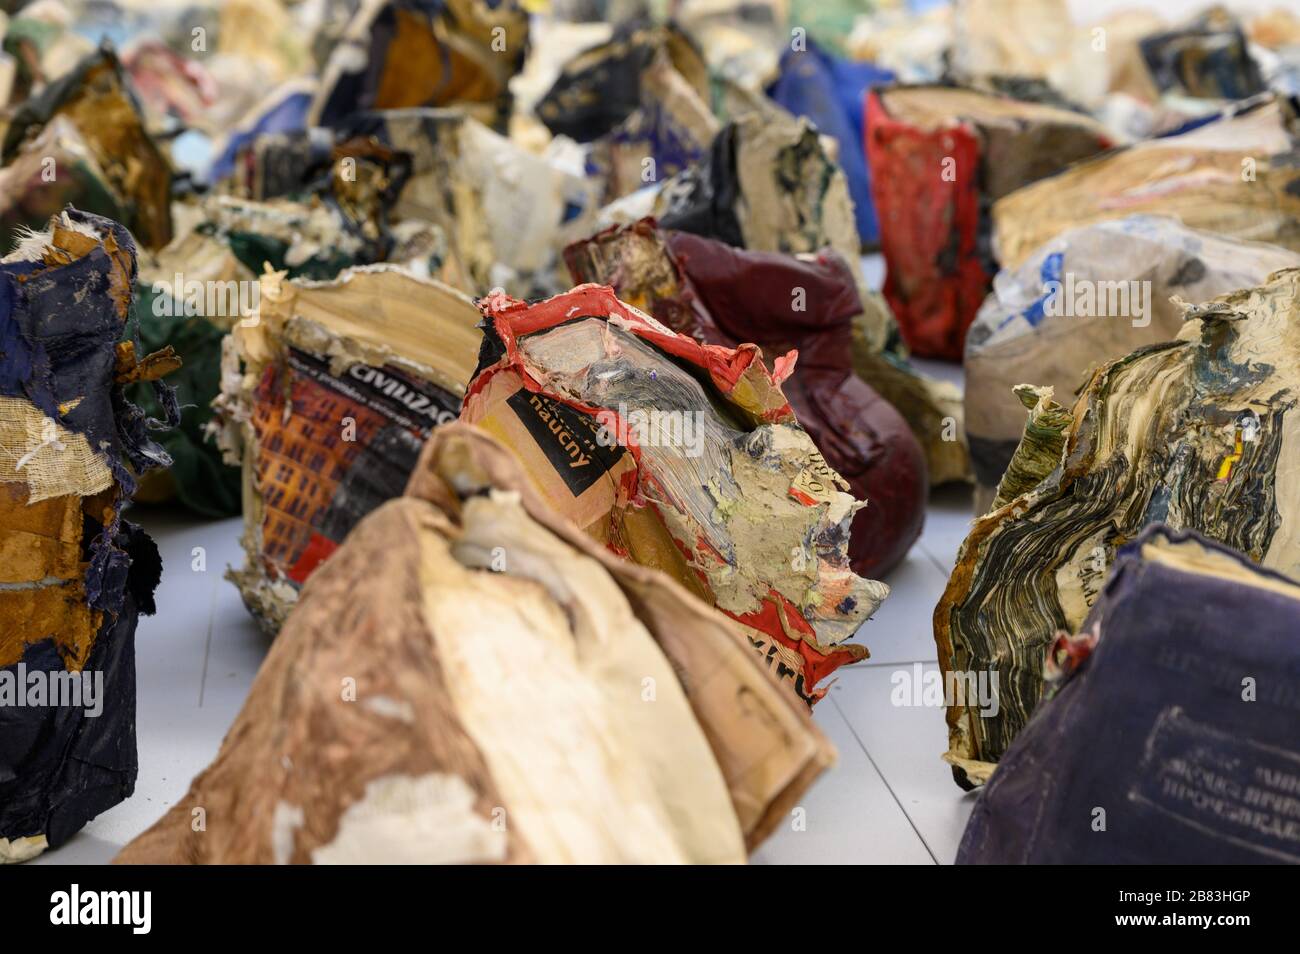 A display of crumpled old books as part of the exhibition by Matej Krén. Bratislava City Gallery. Stock Photo